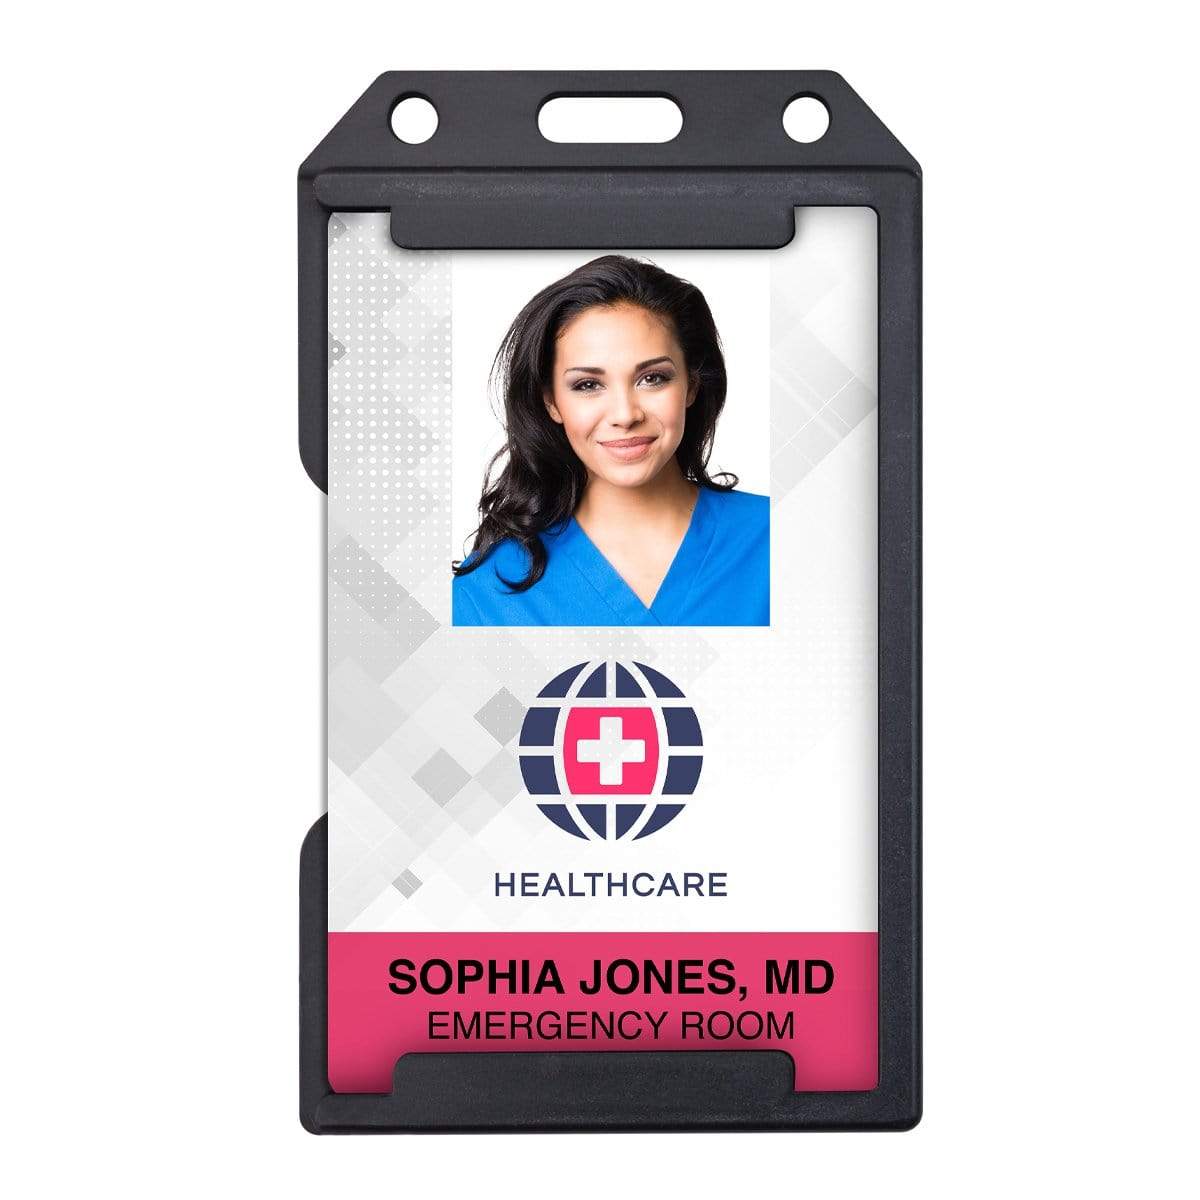 An ID badge with a photo of a smiling person in blue scrubs, labeled "Sophia Jones, MD, Emergency Room" at the bottom, secured in a 2 Sided Rigid Vertical MultiCard Badge Holder - Hard Plastic Multiple ID Card Holder (1840-308X) and featuring a healthcare logo above the name.